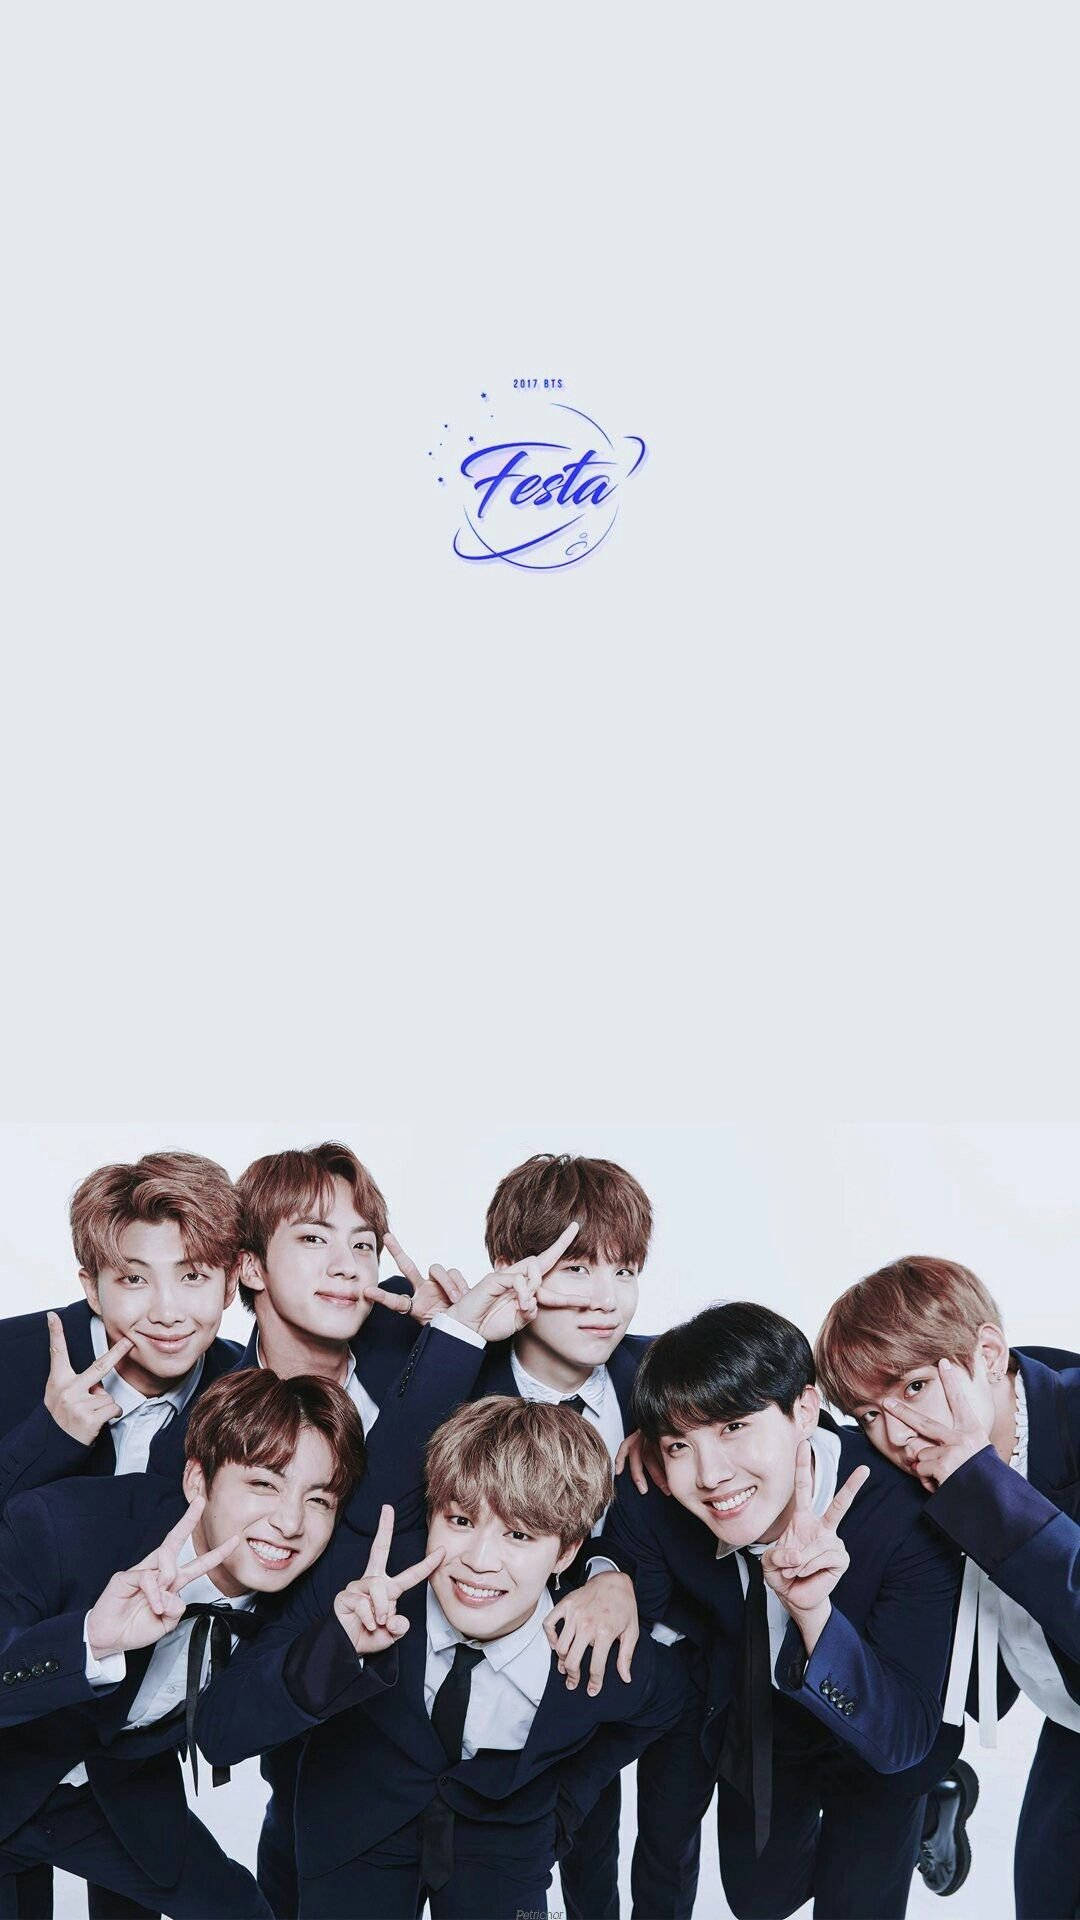 Cute Bts Group Wearing Suits On White Backdrop Wallpaper